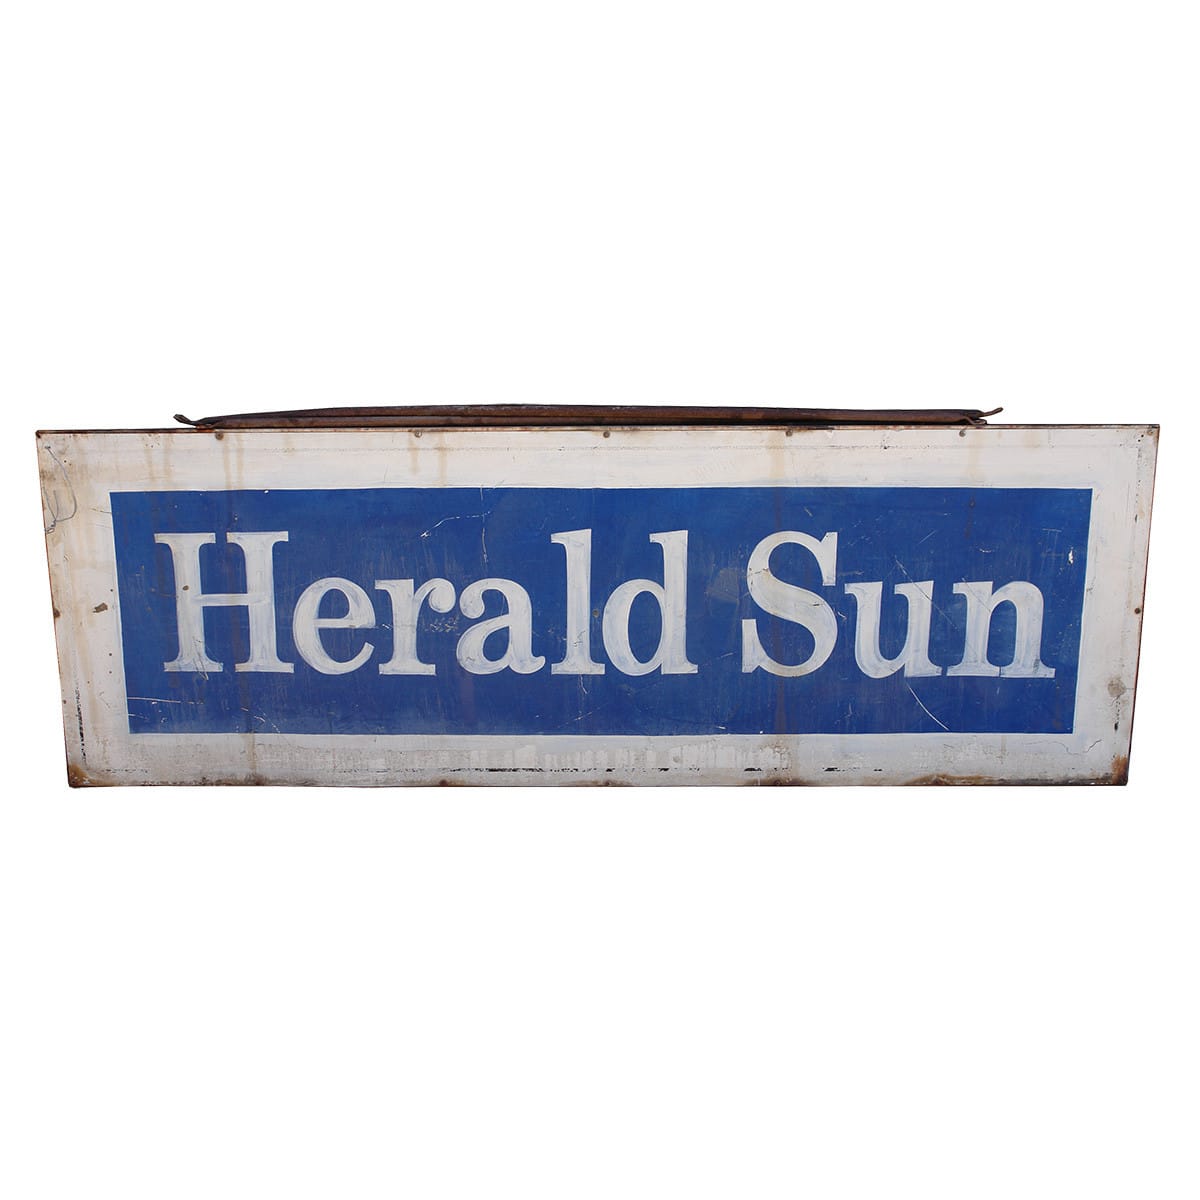 Painted Metal sign. Herald Sun. Metal frame and arms. (Melbourne, Victoria)